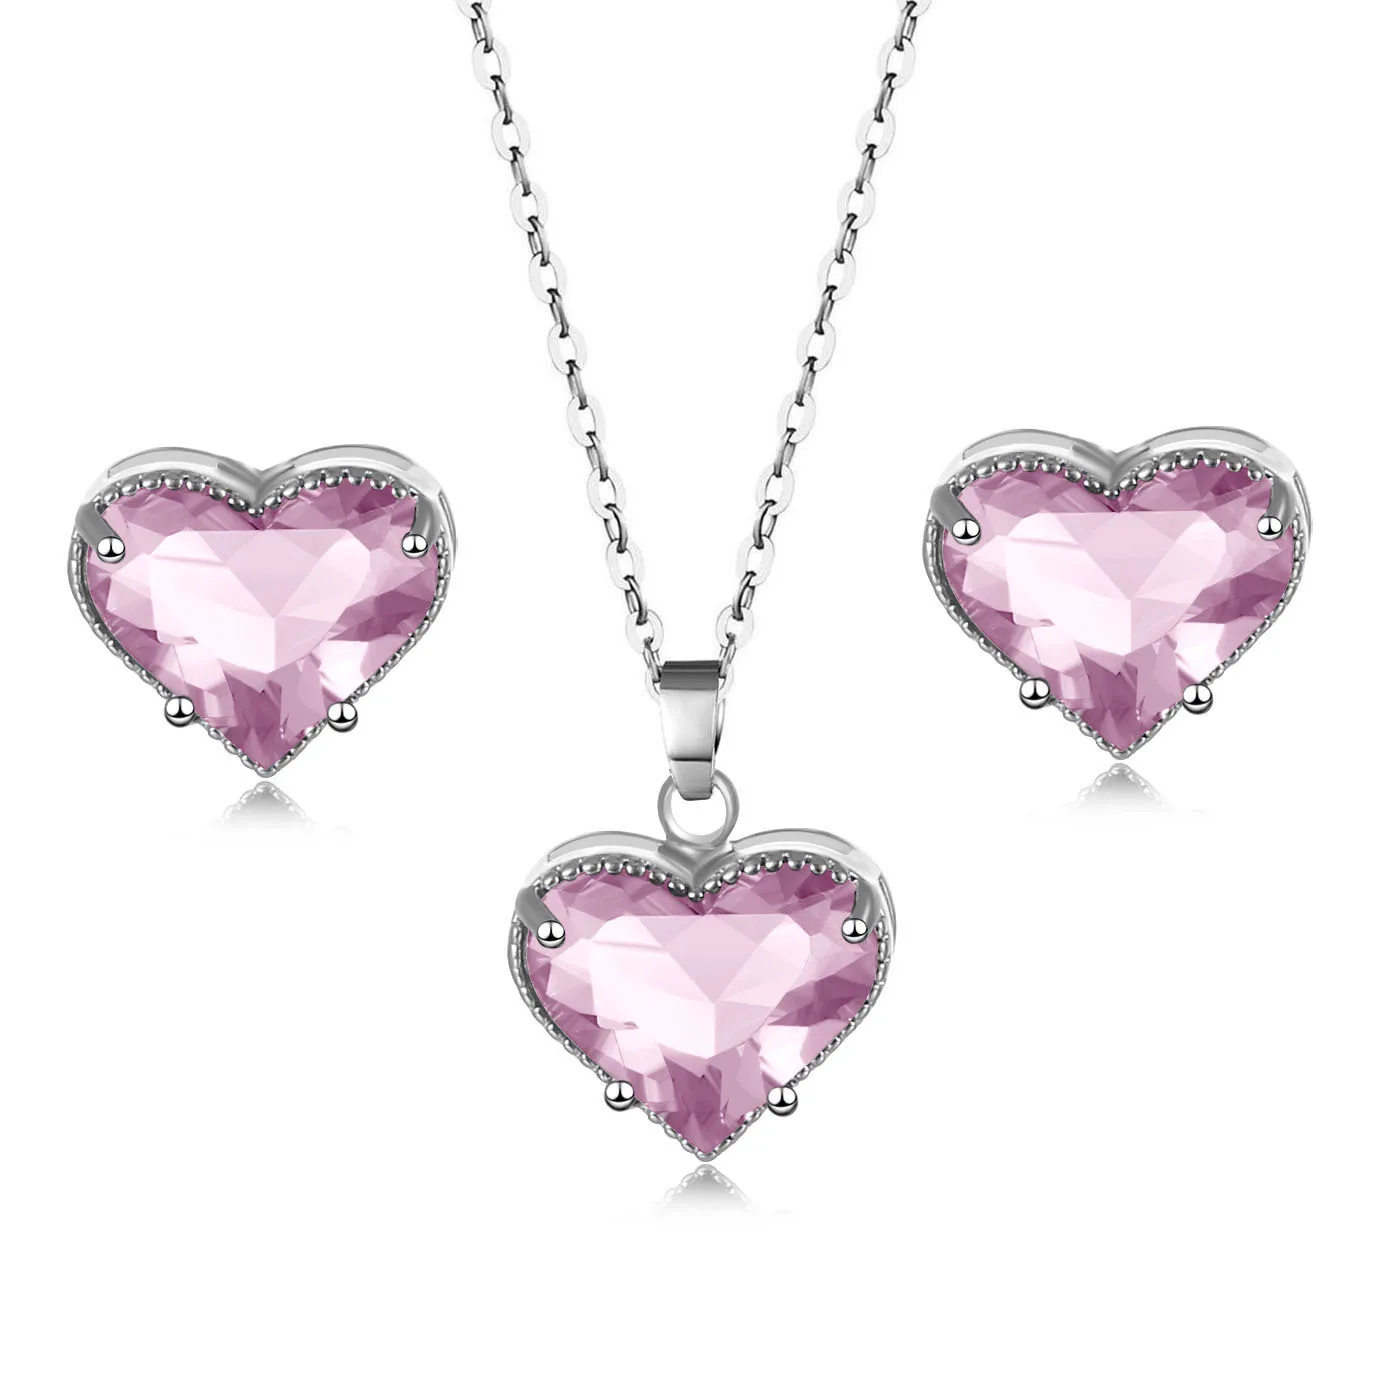 

Hainon cheap jewelry set stud earring necklace heart pink blue purple crystal 925 silver plated jewelry set wholesale